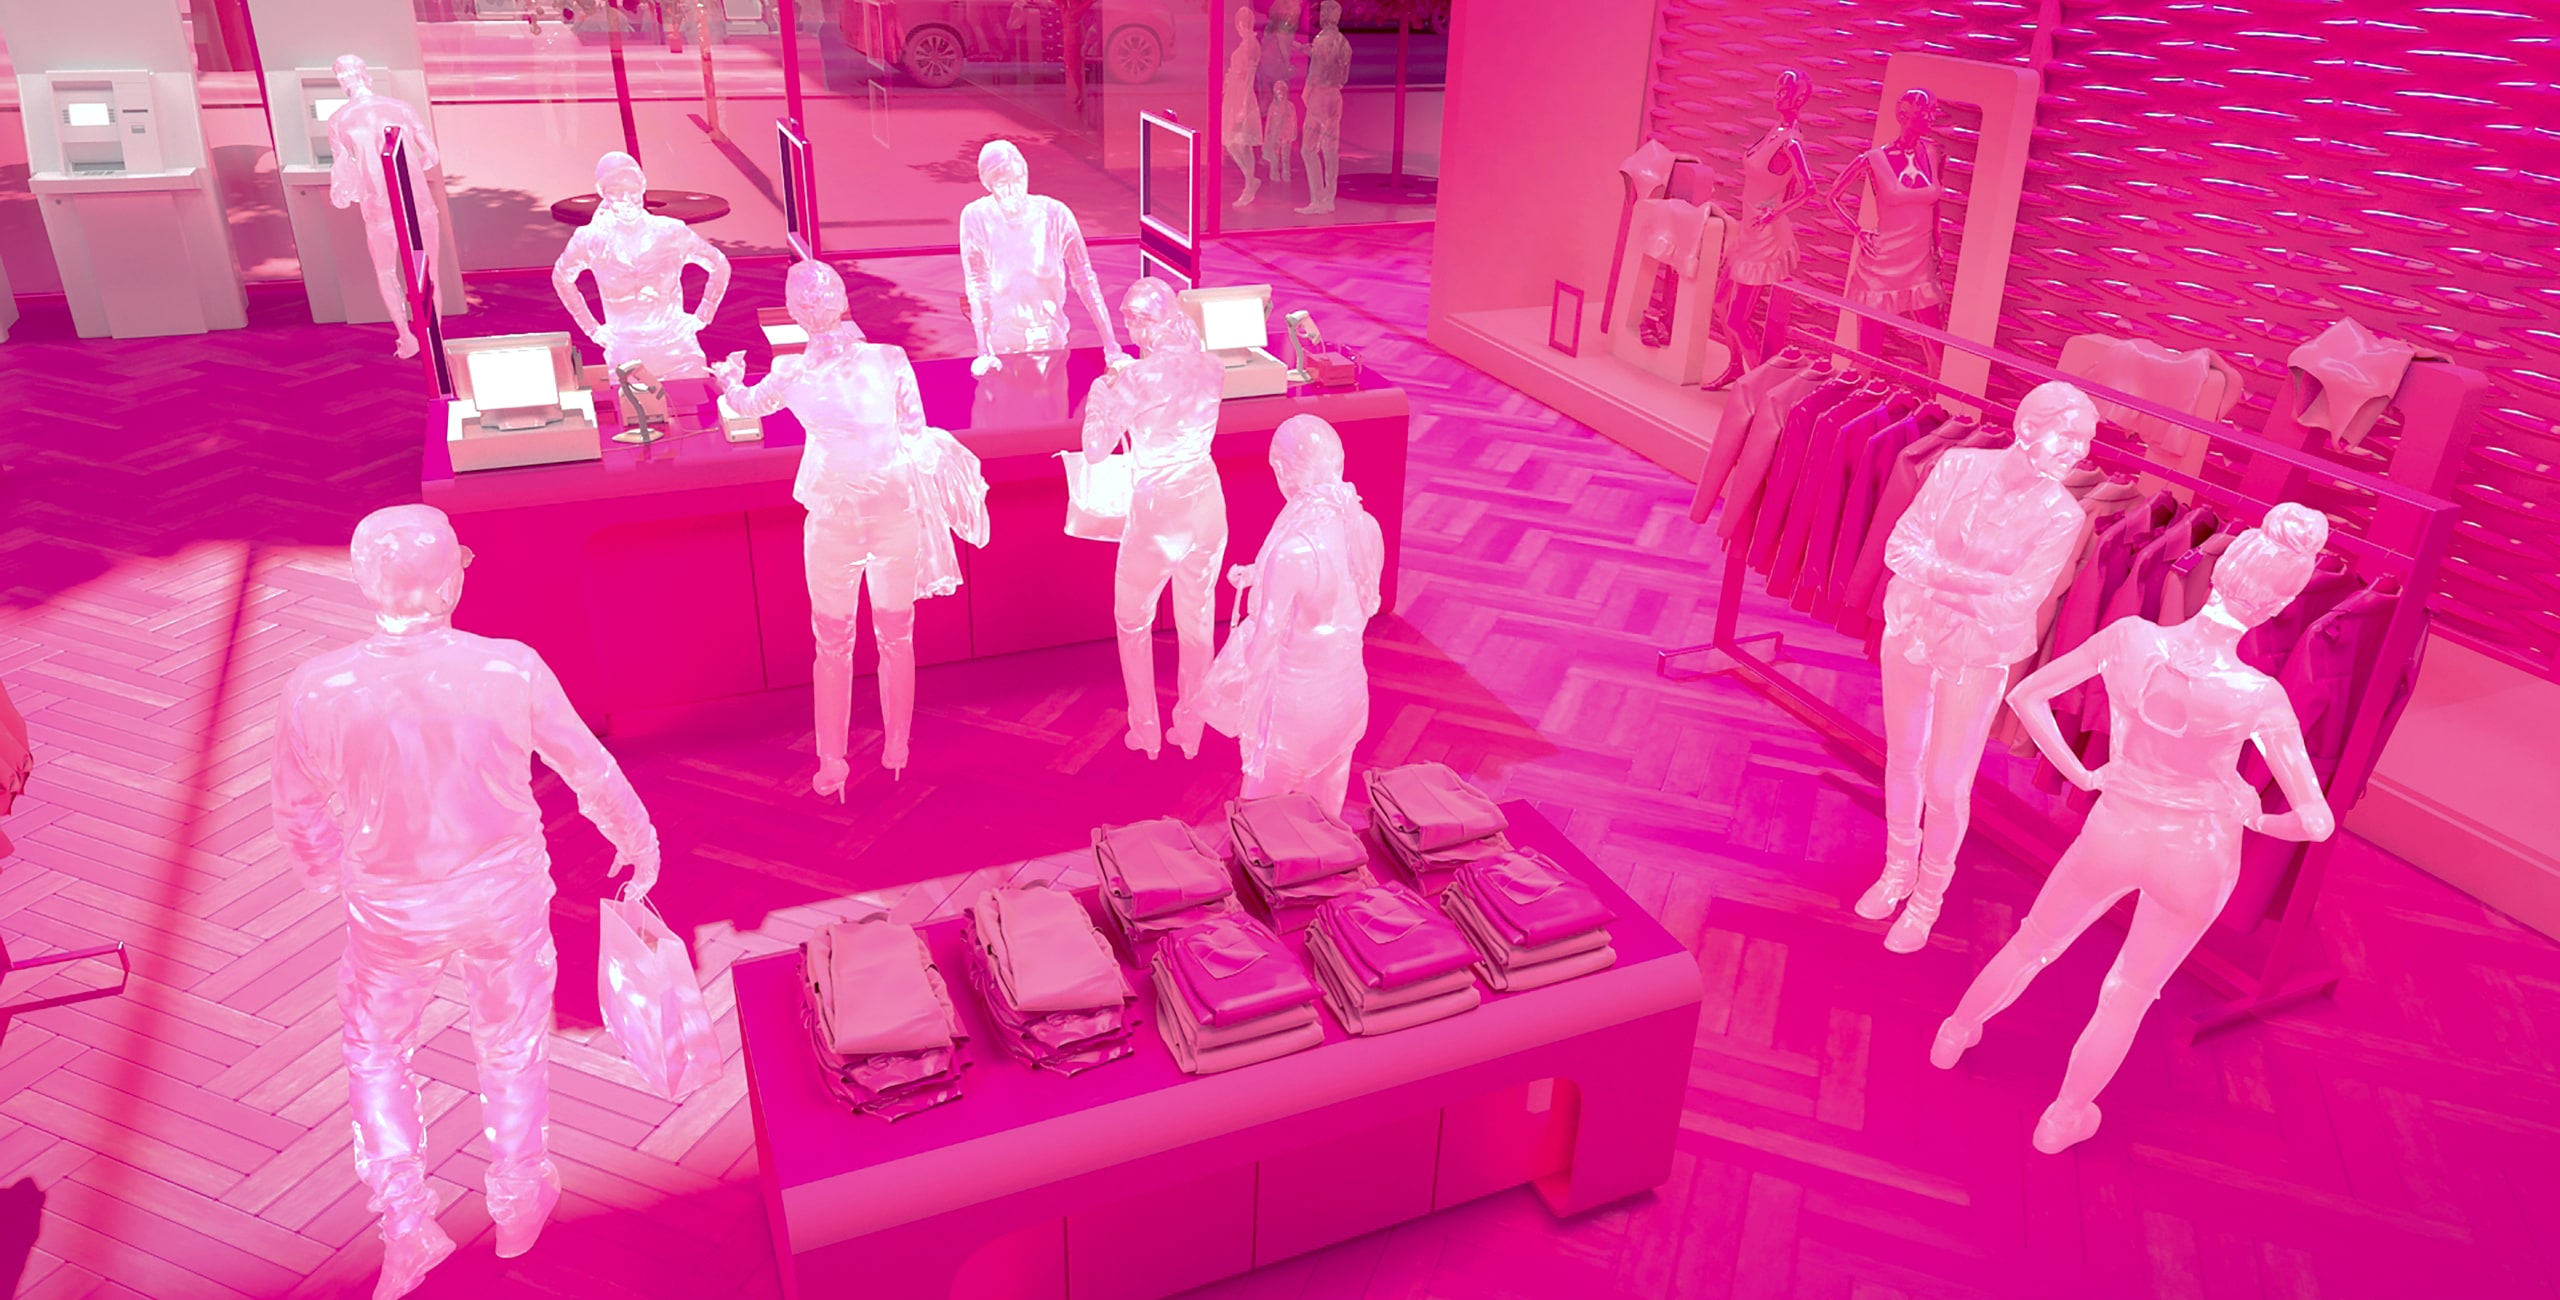 Mannequins in a pink room with mannequins.